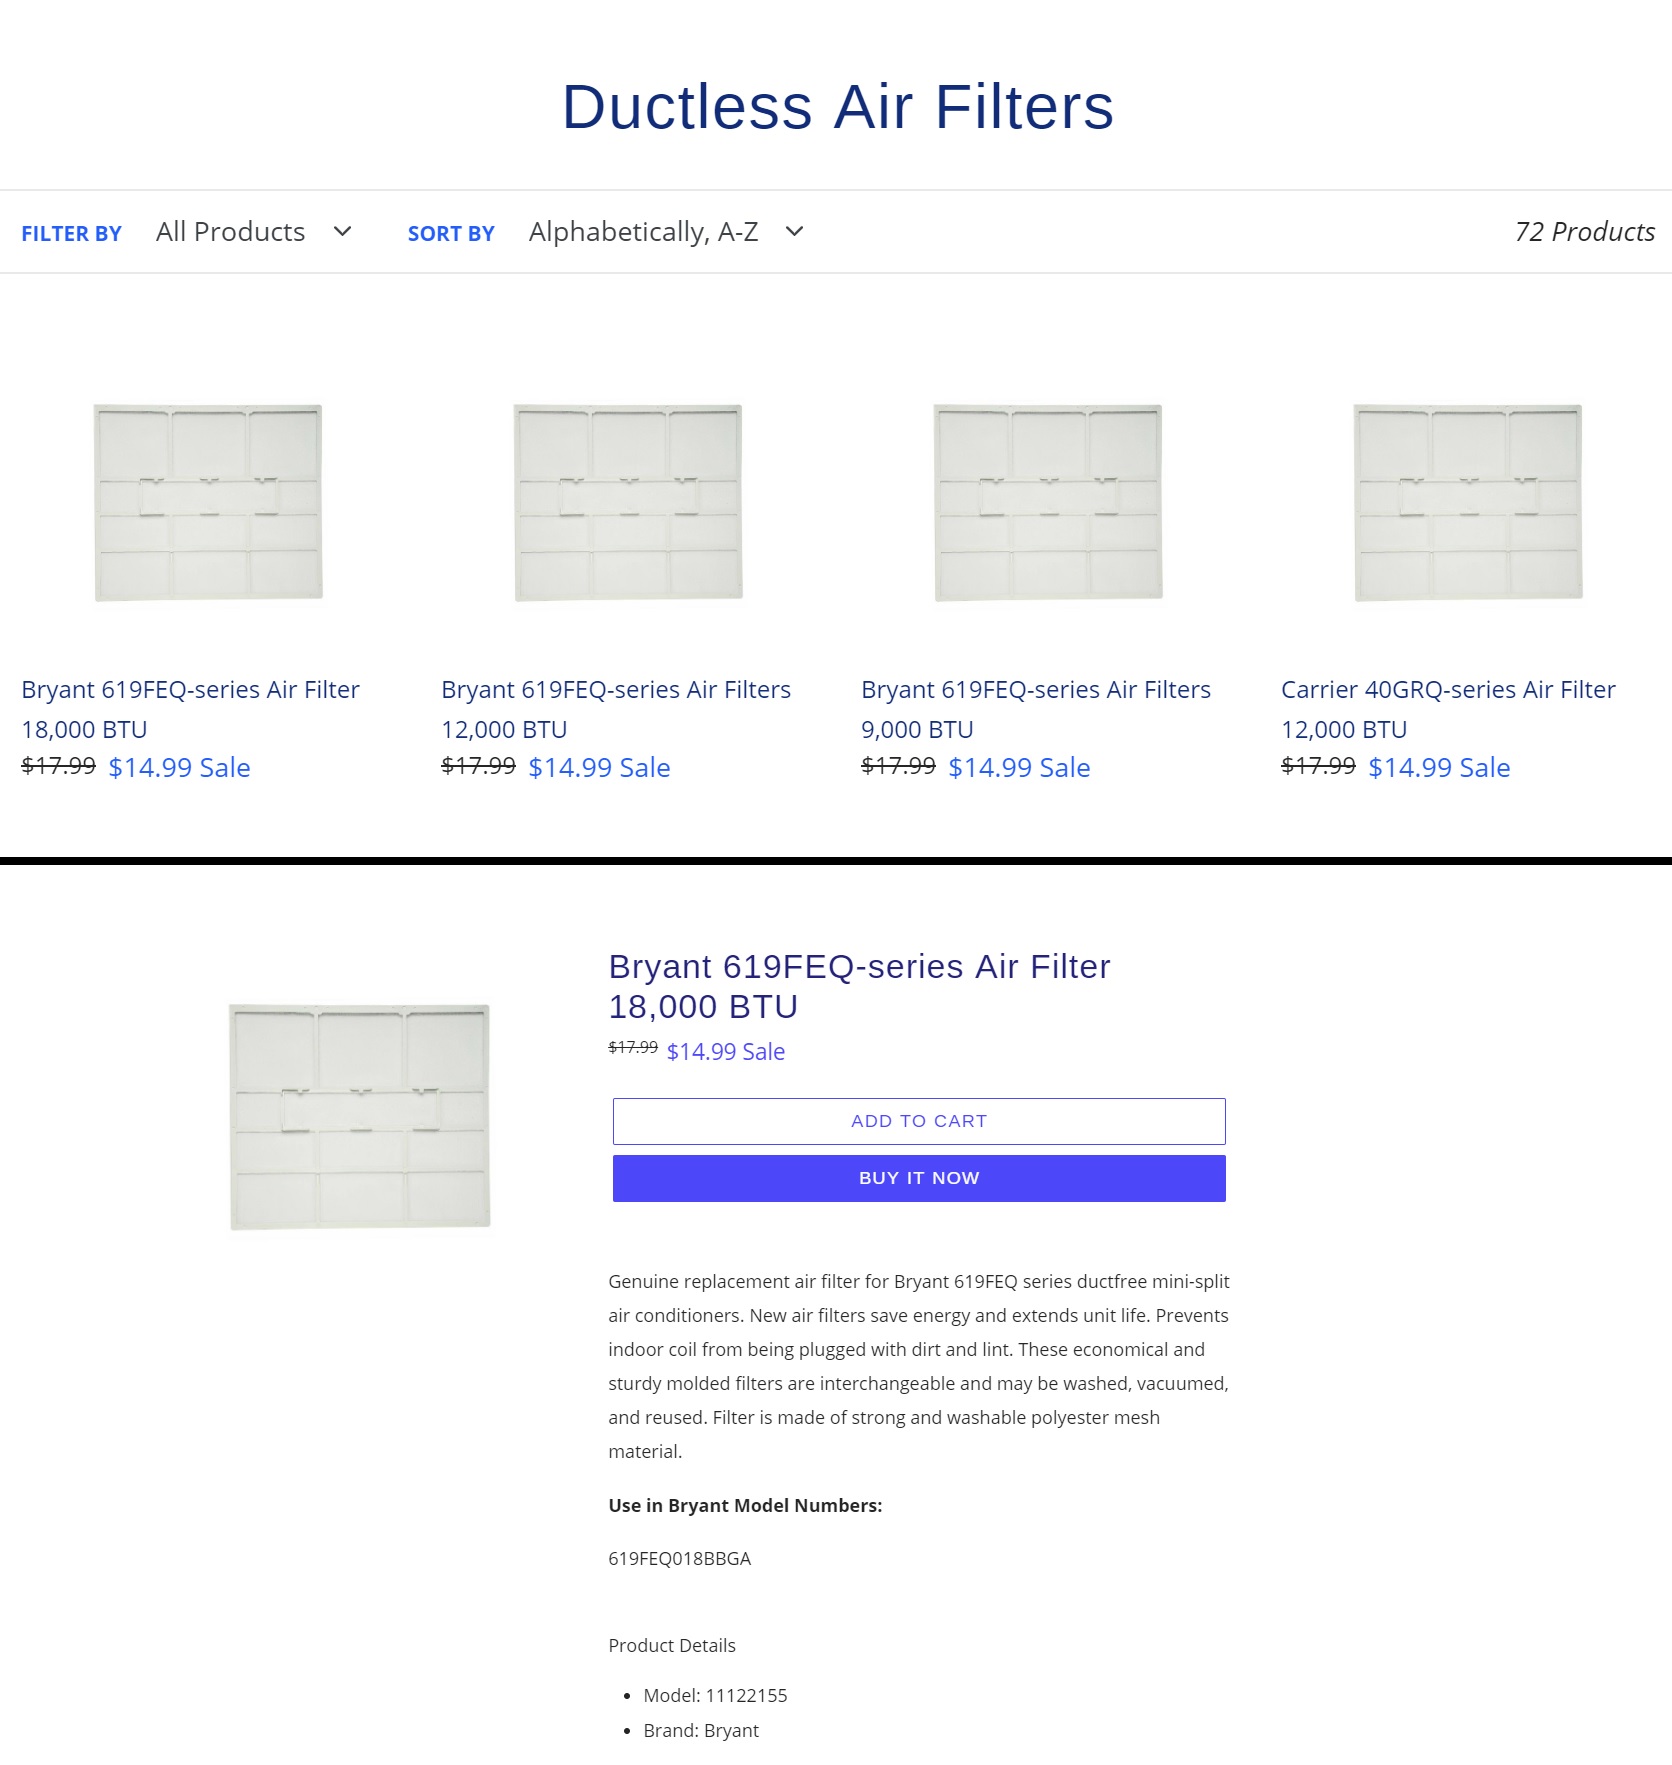 ecommerce website design product categories and product detail pages for genuine air filters from acs web design and seo